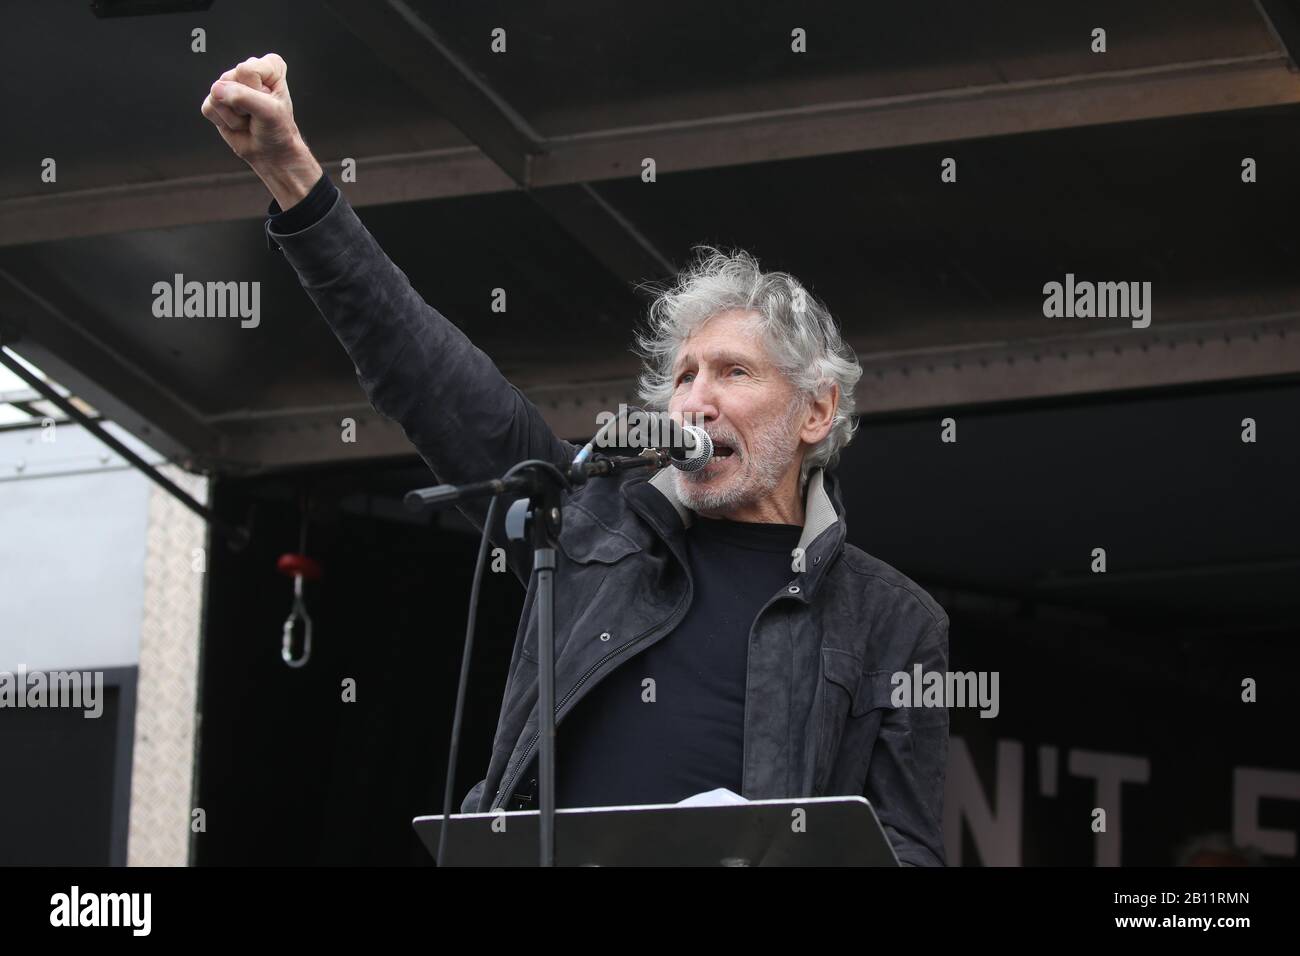 Pink Floyd bassist Roger Waters speaks to crowds gathered in Parliament Square in Westminster, London, protesting Julian Assange's imprisonment and extradition. Stock Photo